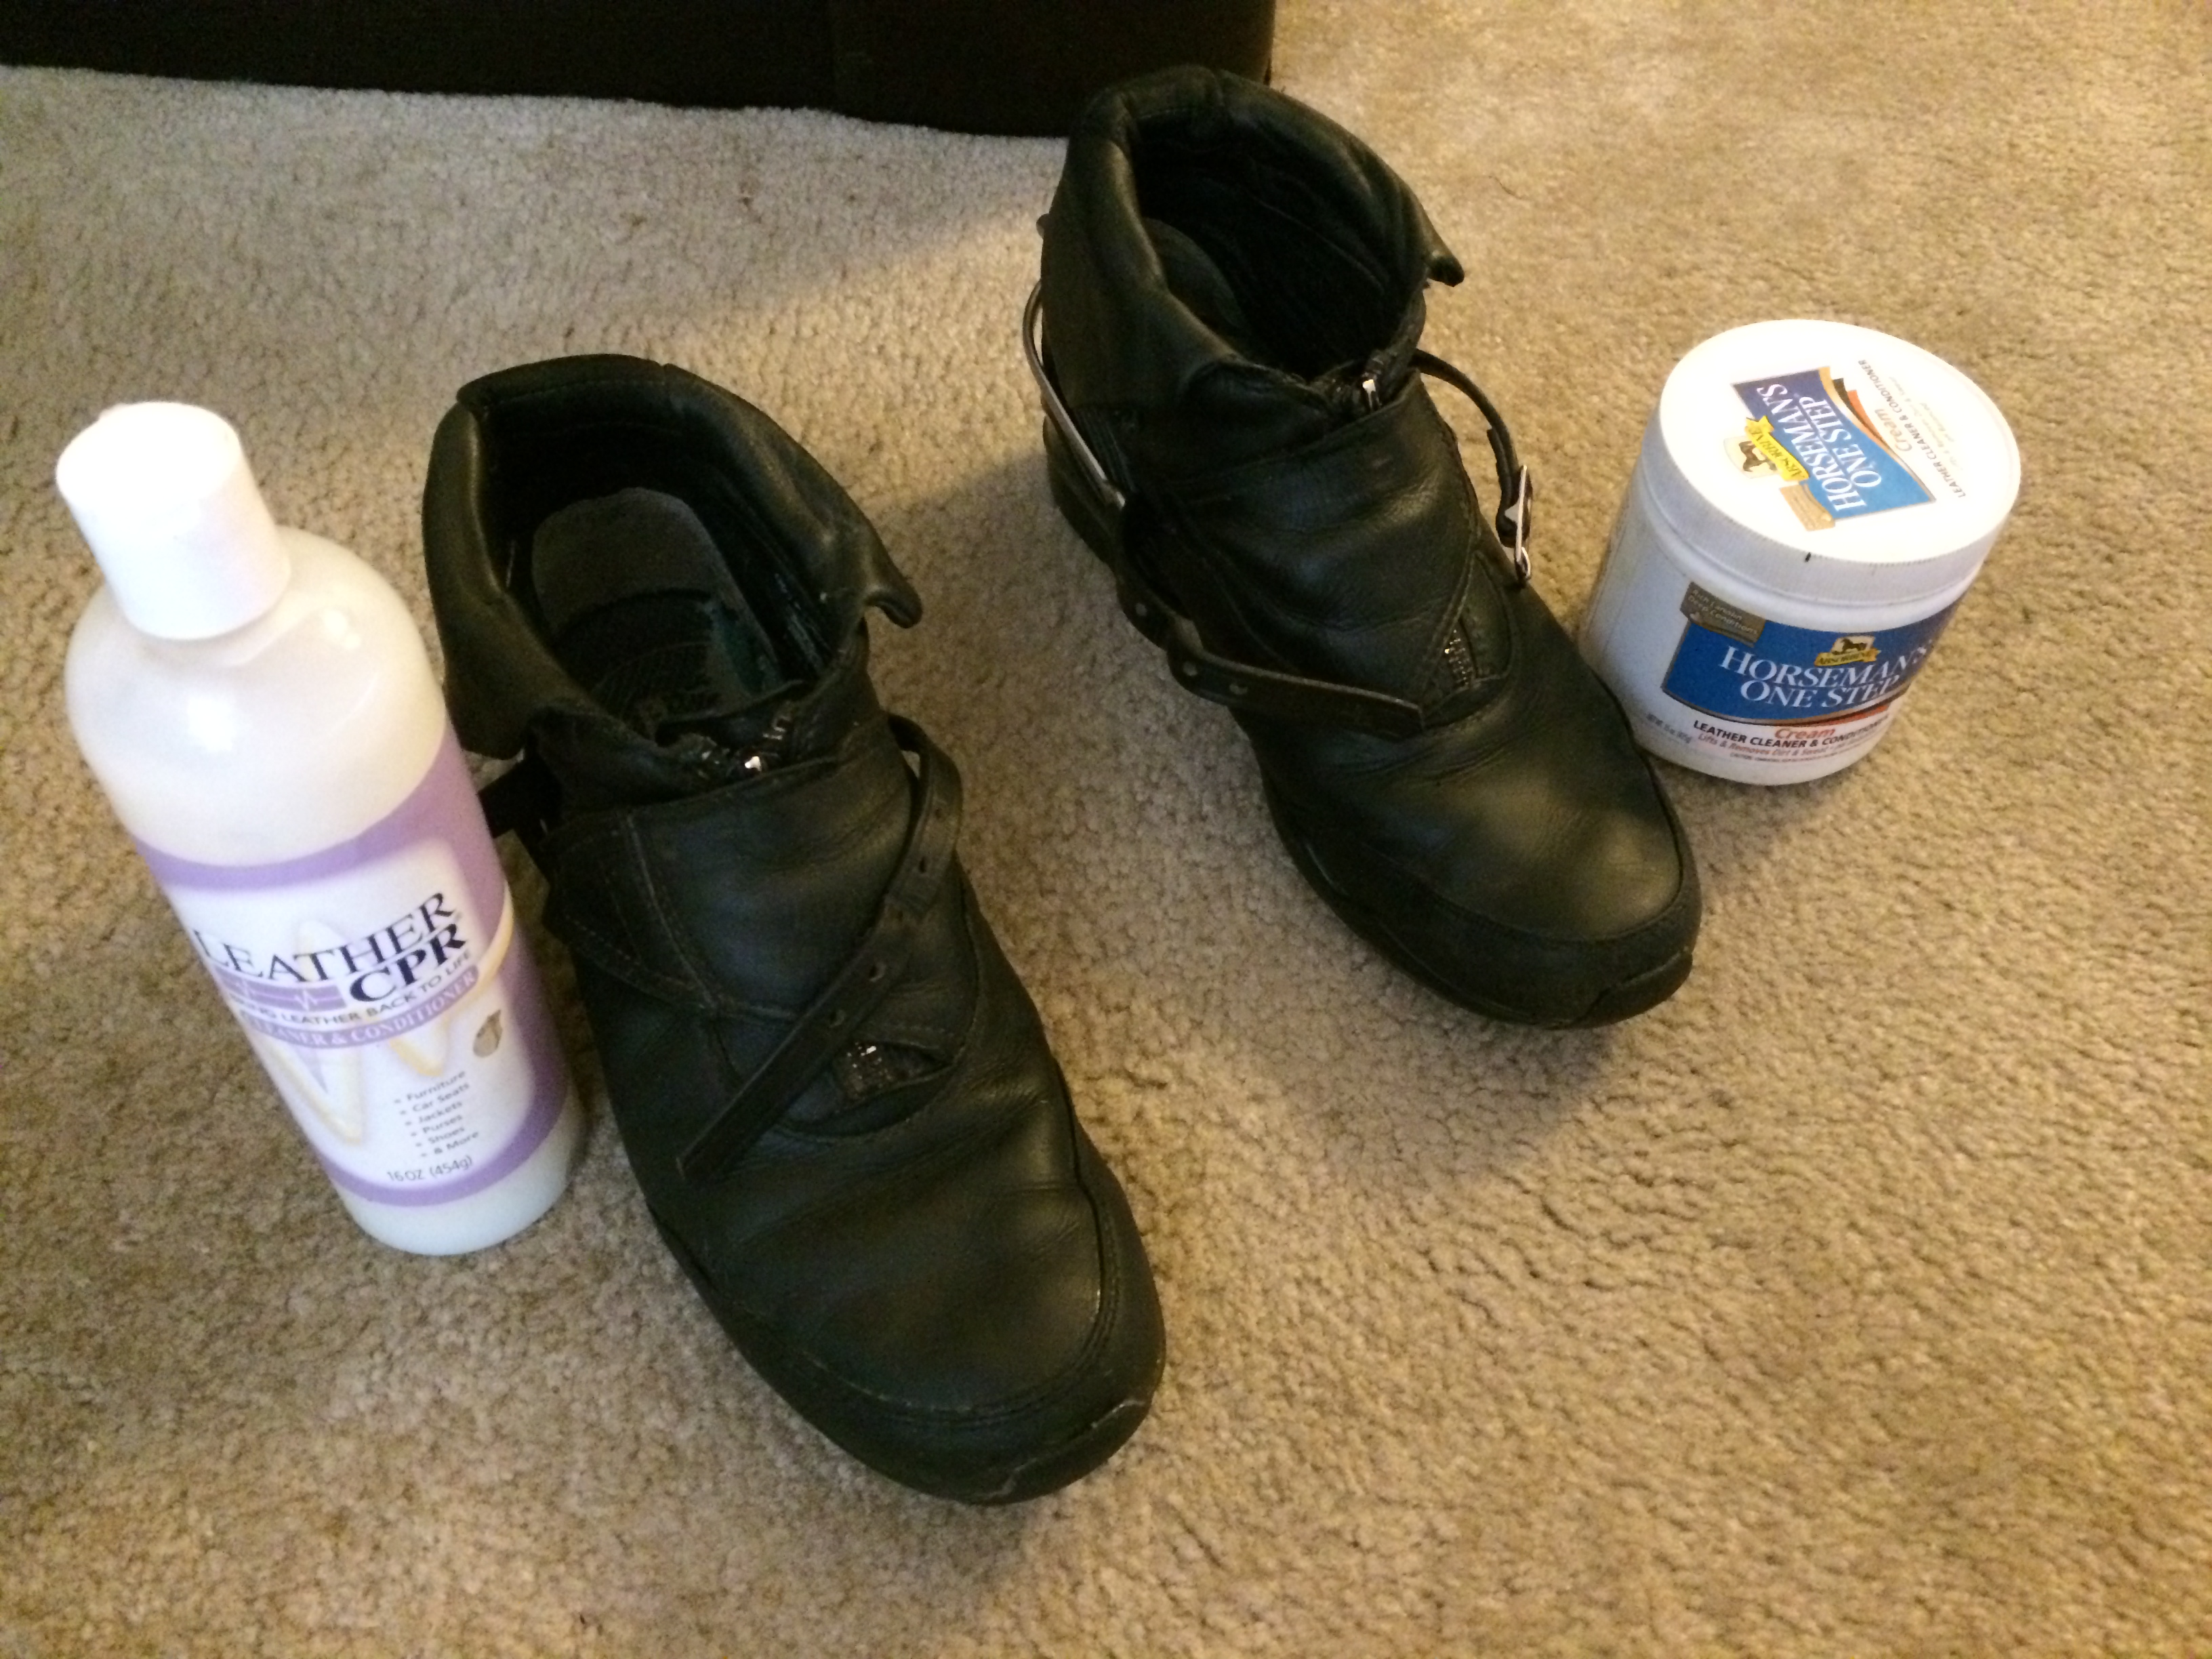 Cleaning Ariat Volant Fusion Paddock Boots cleaned with Leather CPR verses Horseman's One Step